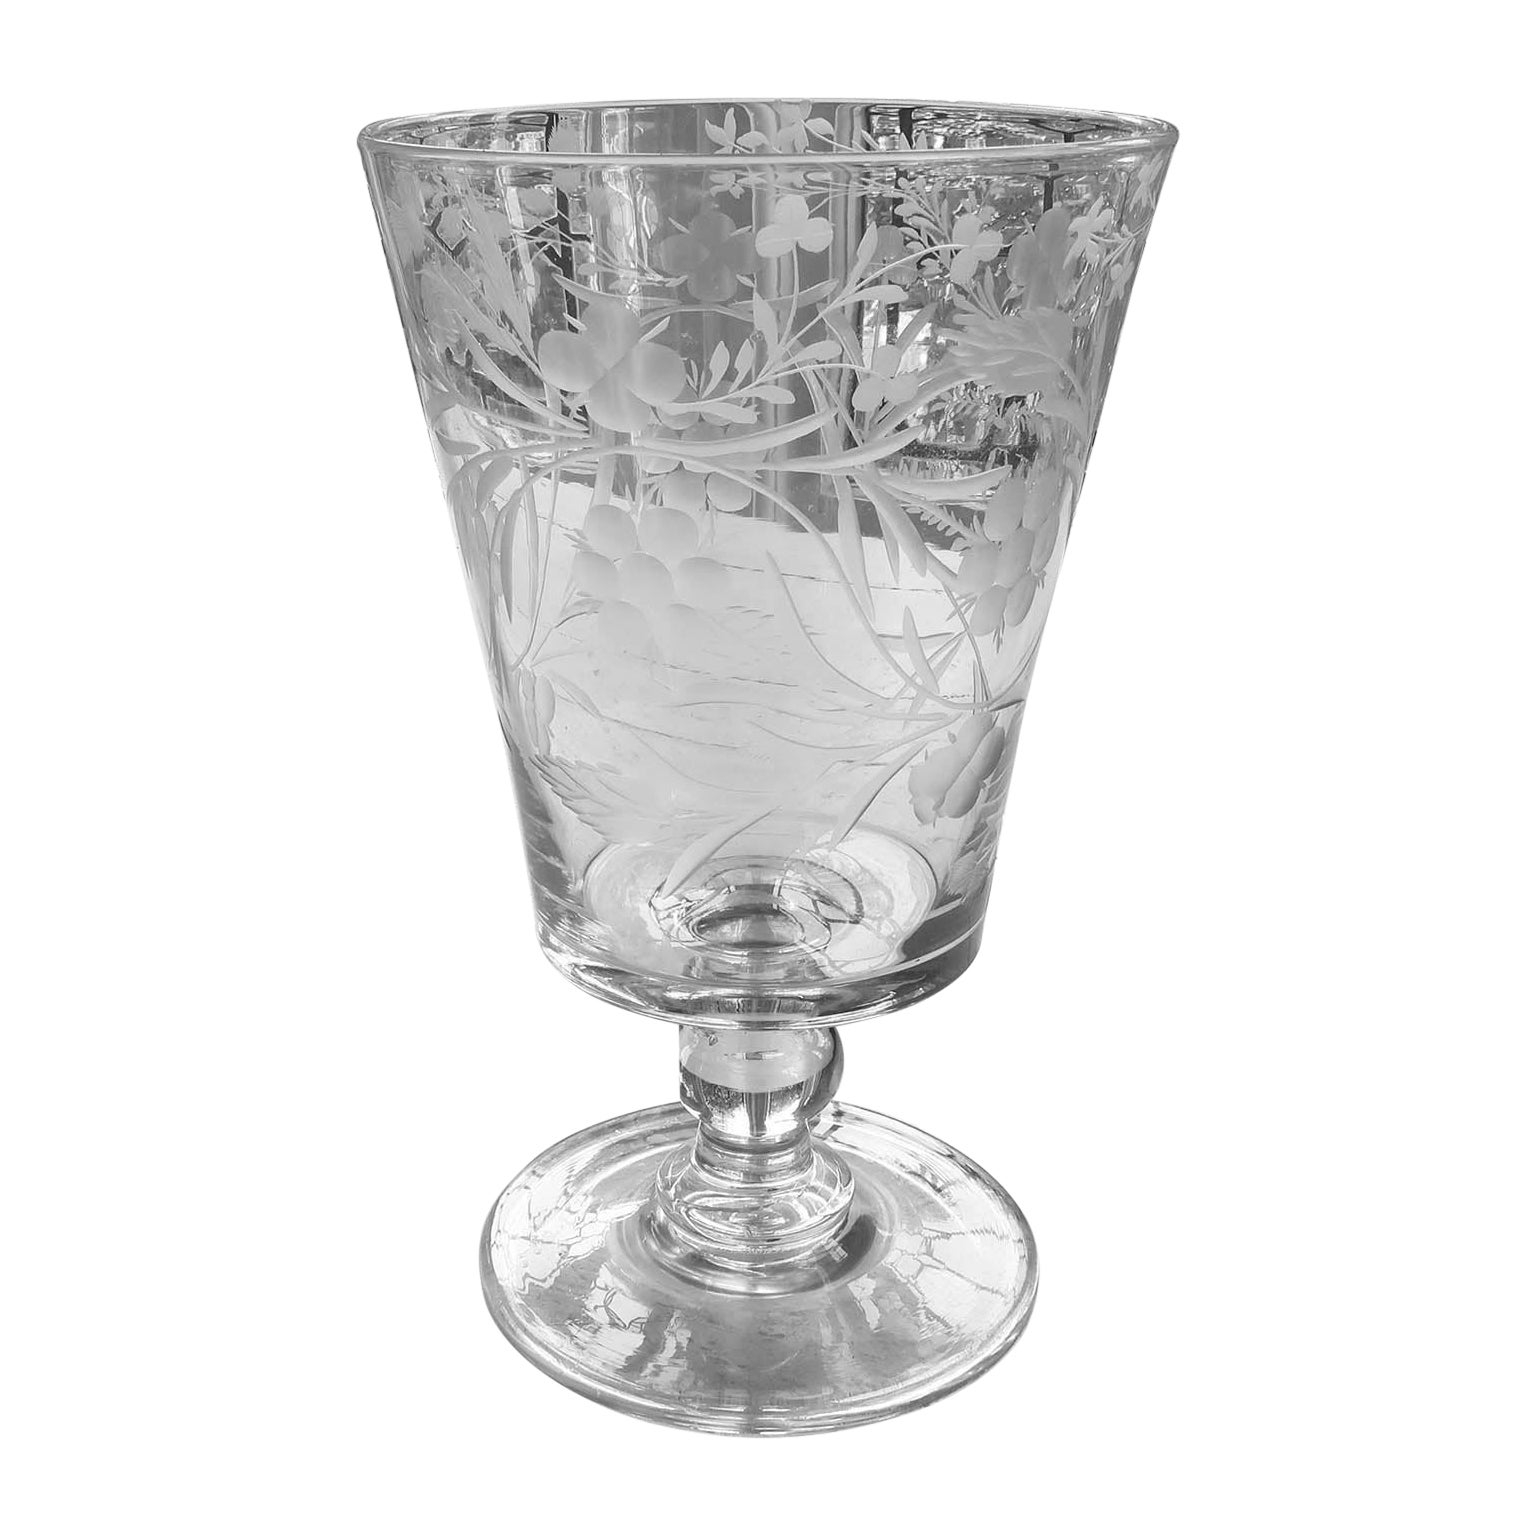  Large Antique Engraved Glass Flower Vase, English, 19th Century For Sale